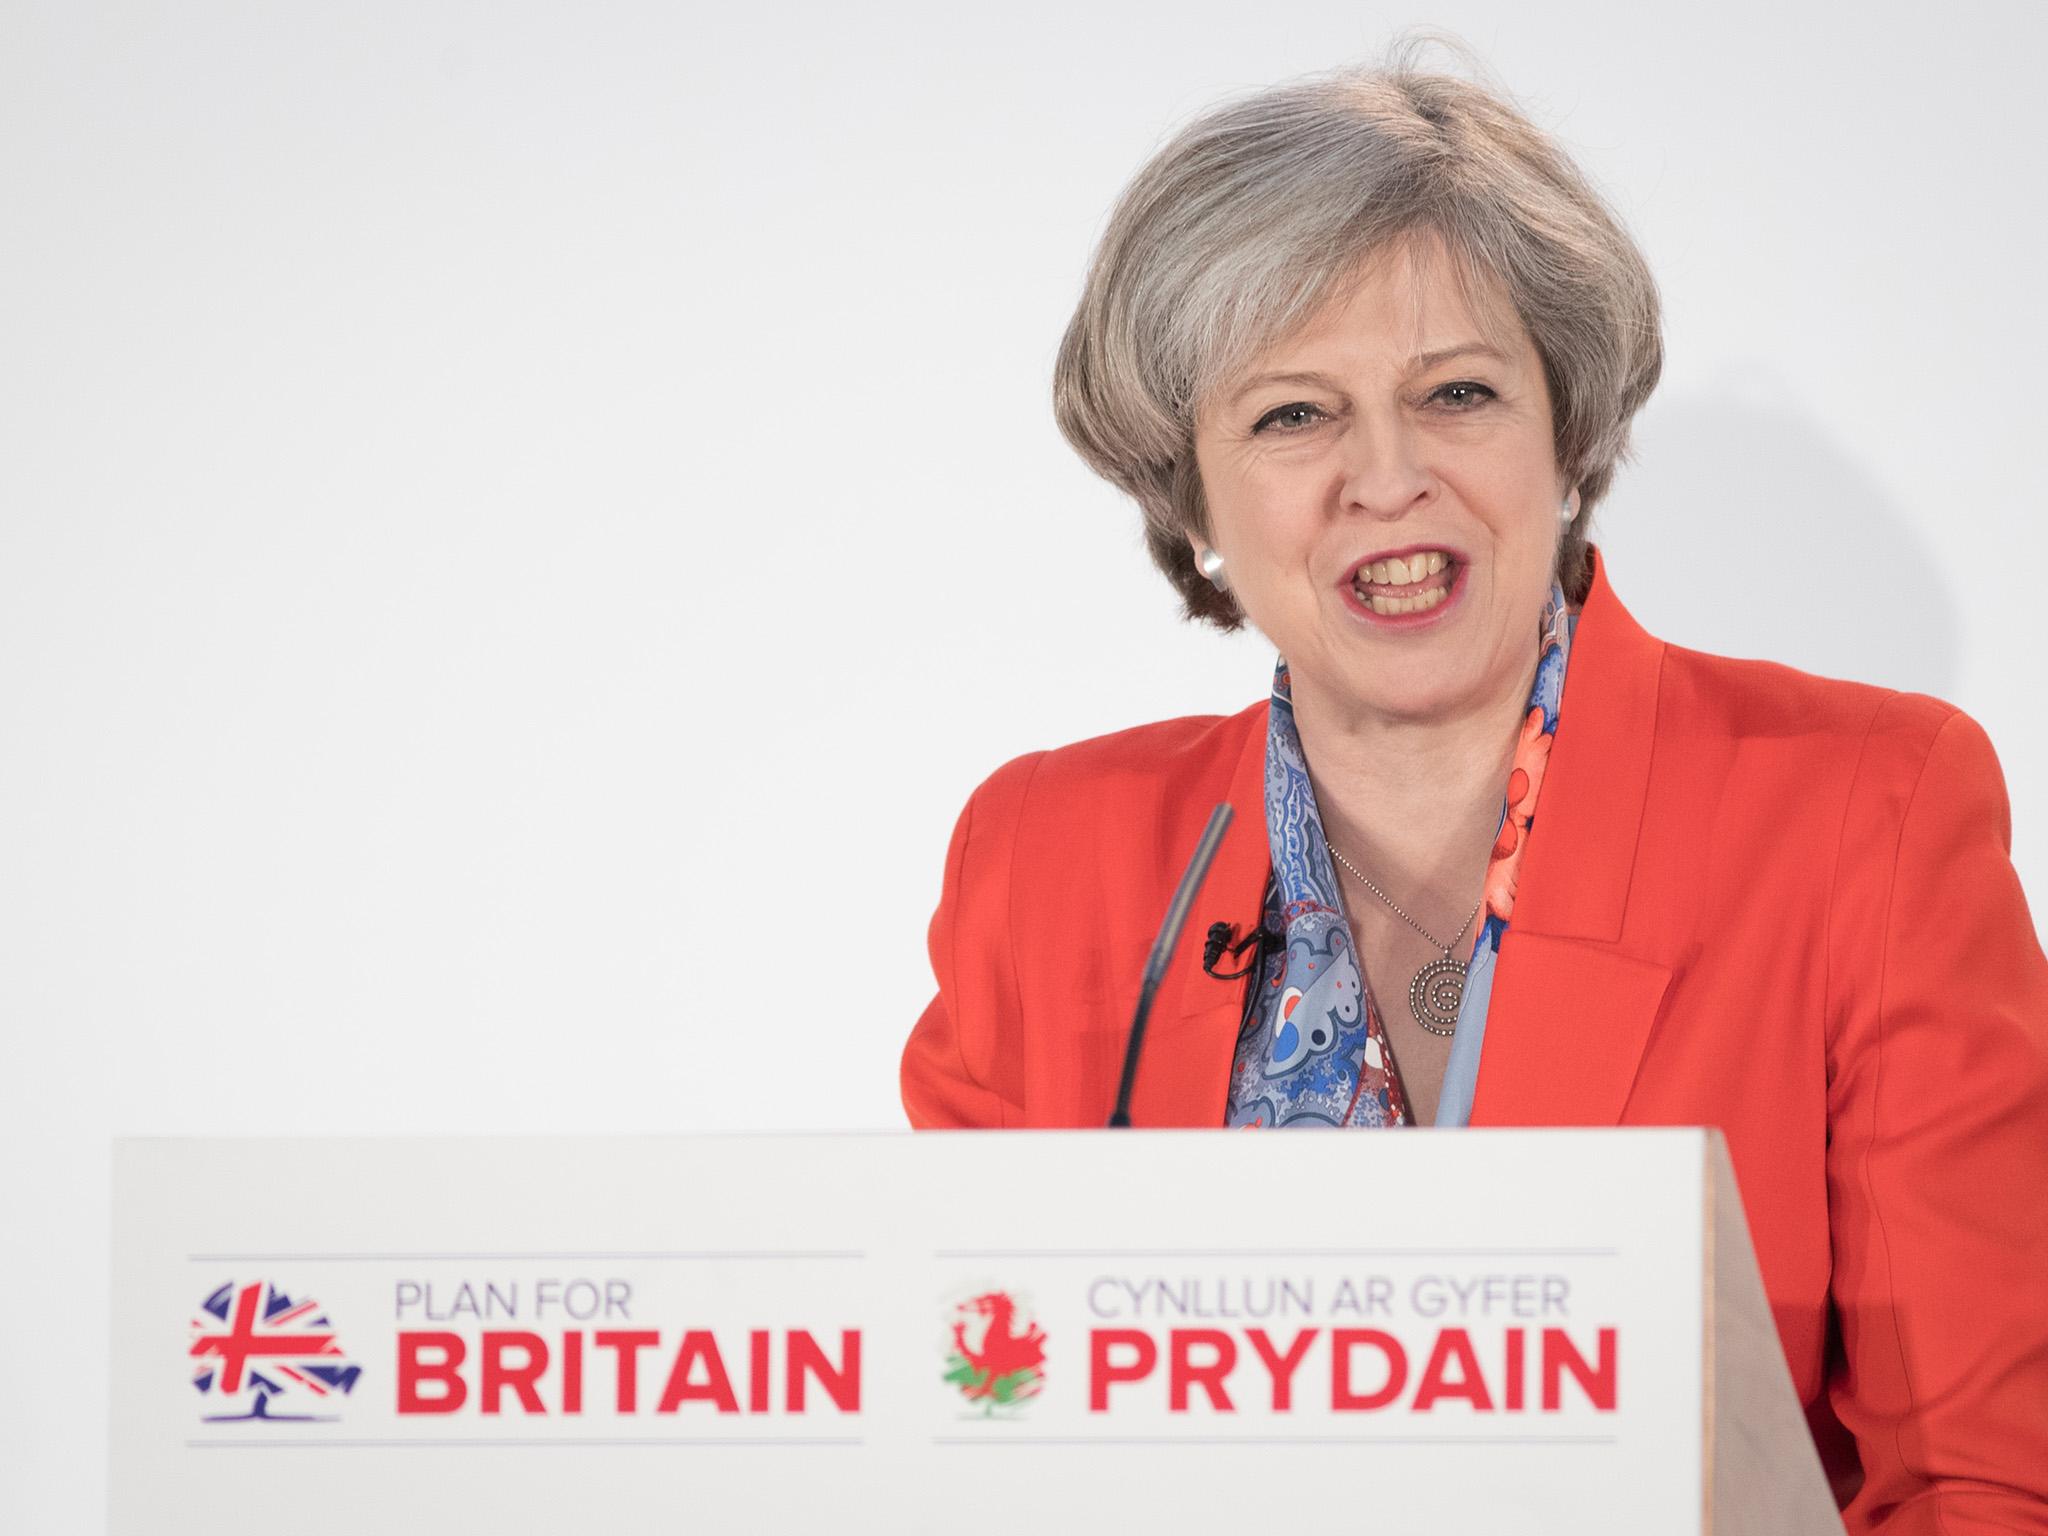 In a speech to the party faithful in Cardiff, the Prime Minister said prices had soared by 158 per cent over the last 15 years, with the poorest hit by the highest tariffs